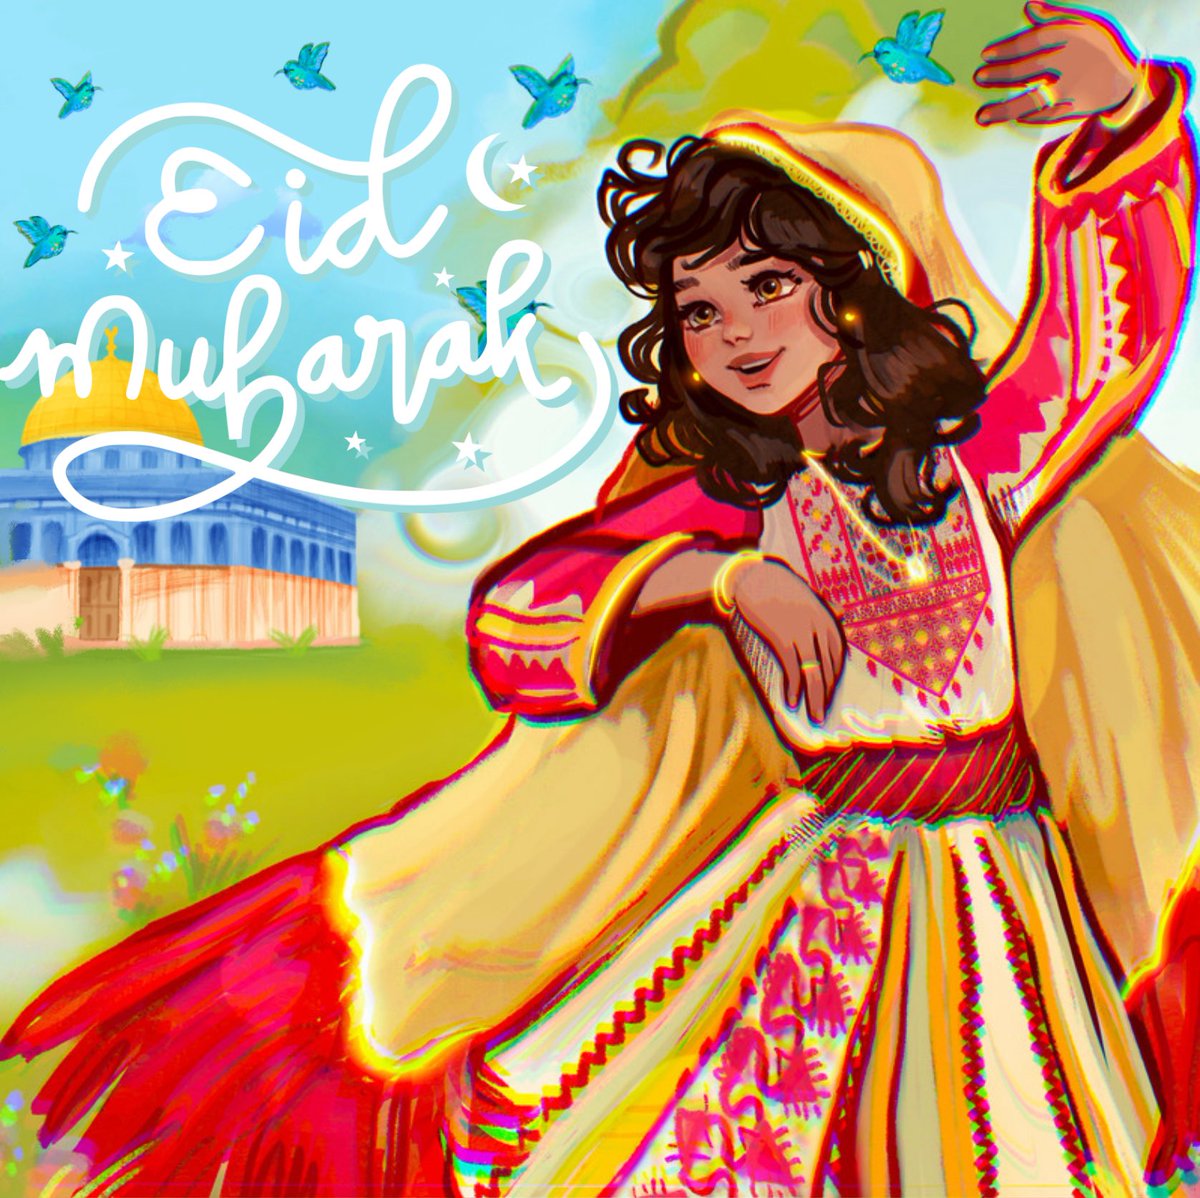 Wishing for everyone to have an Eid Mubarak and for a free Palestine! 🌙♥️